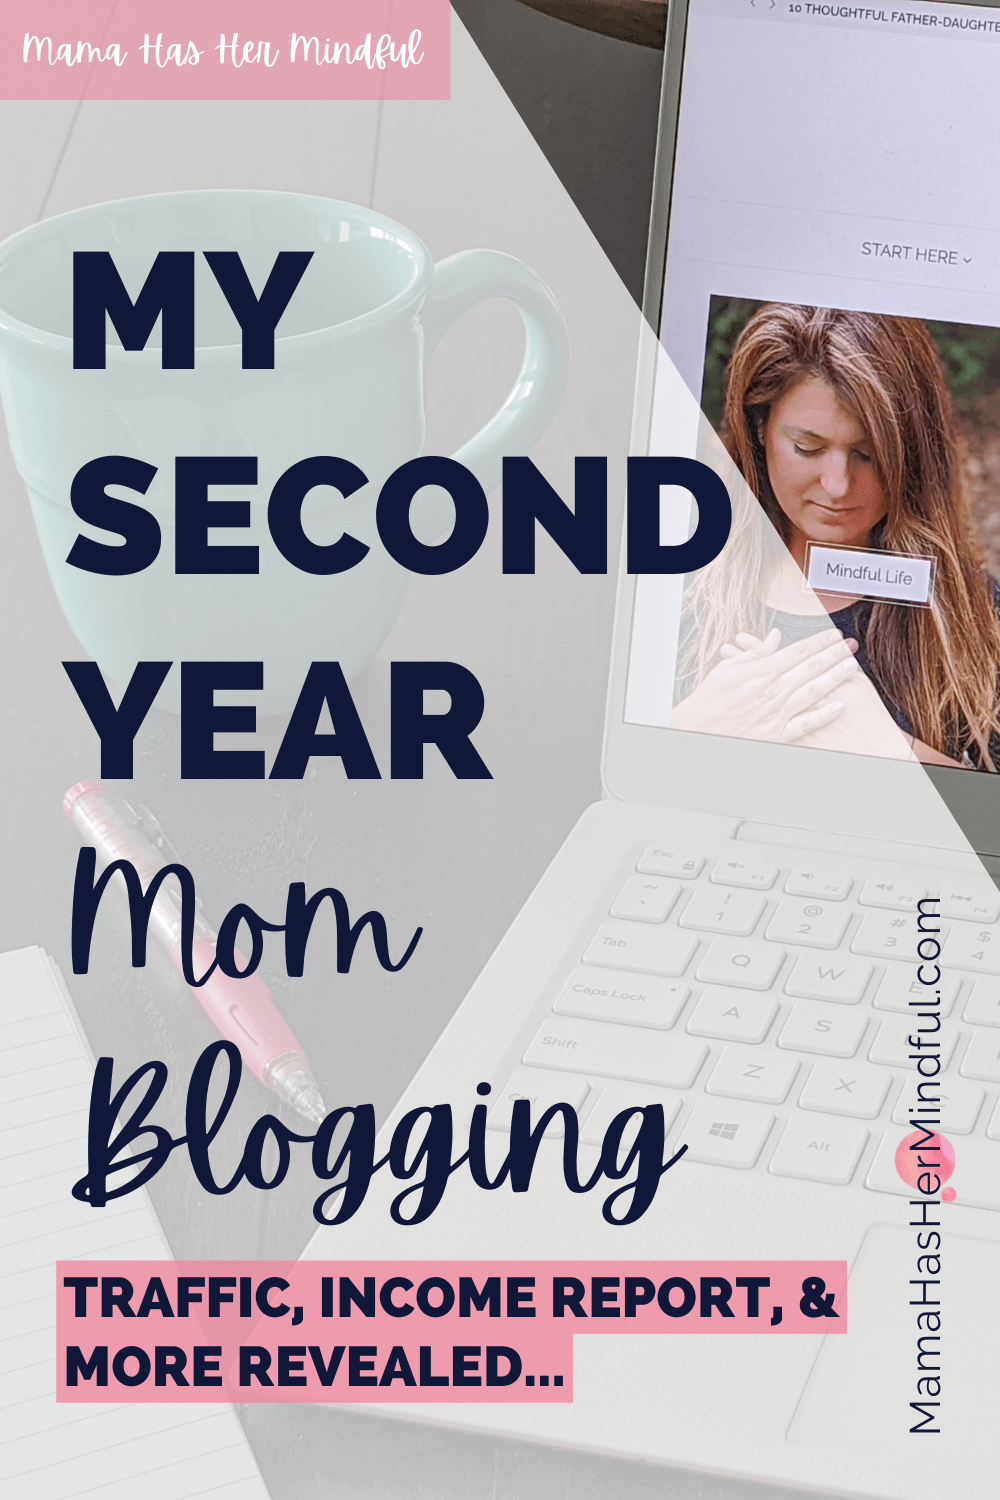 My Second Year Mom Blogging: Traffic, Income Report & More Revealed